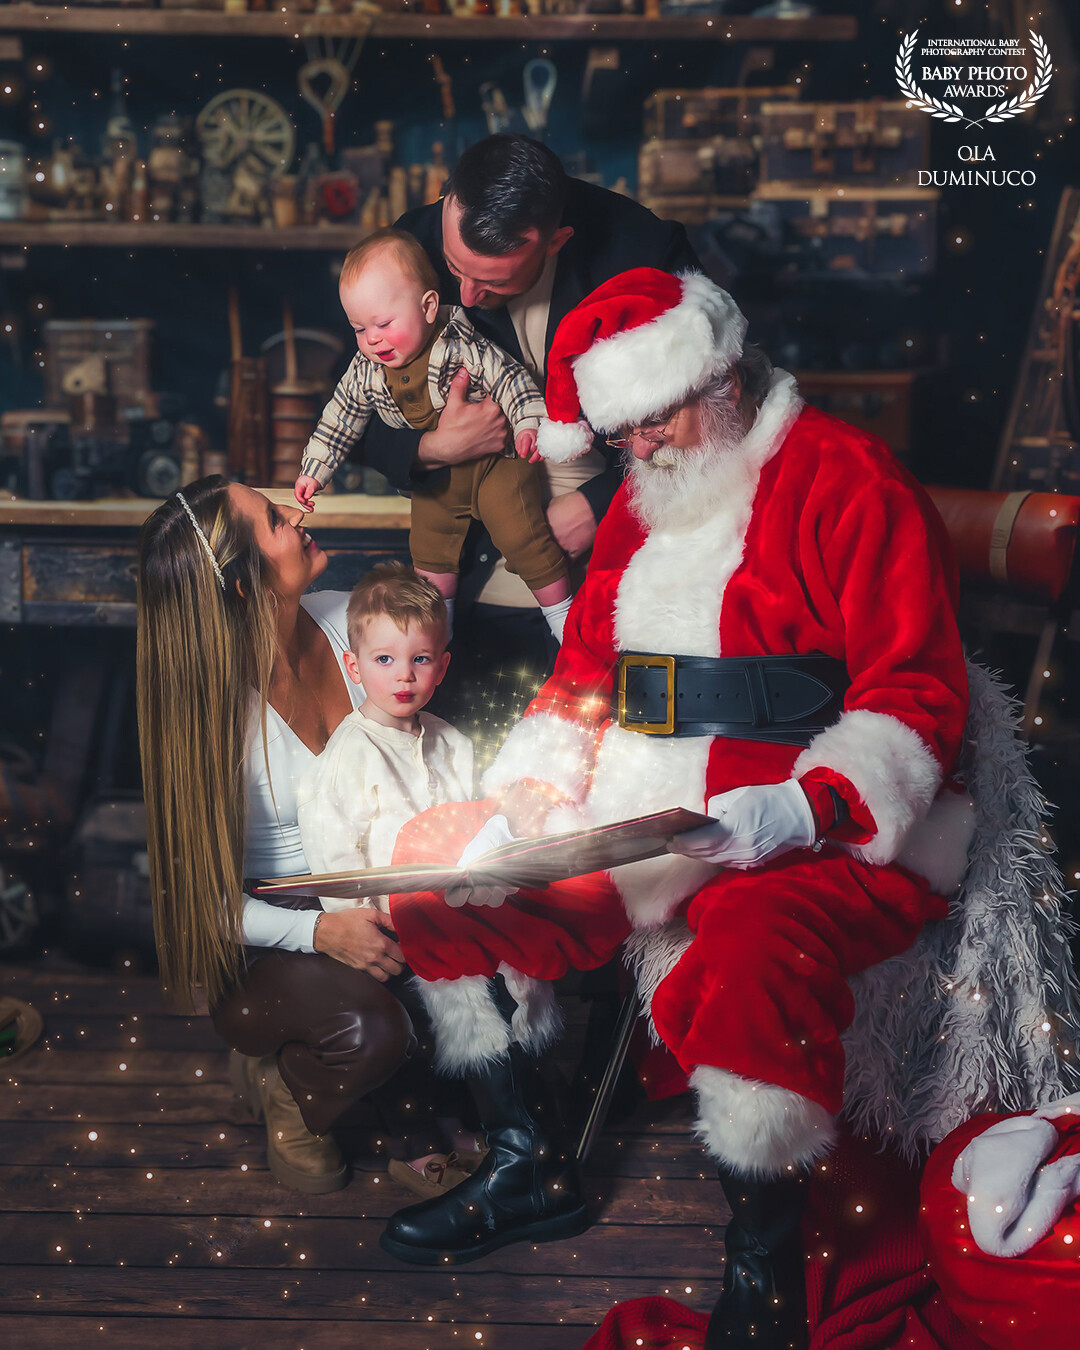 Storytime with Santa is truly magical.